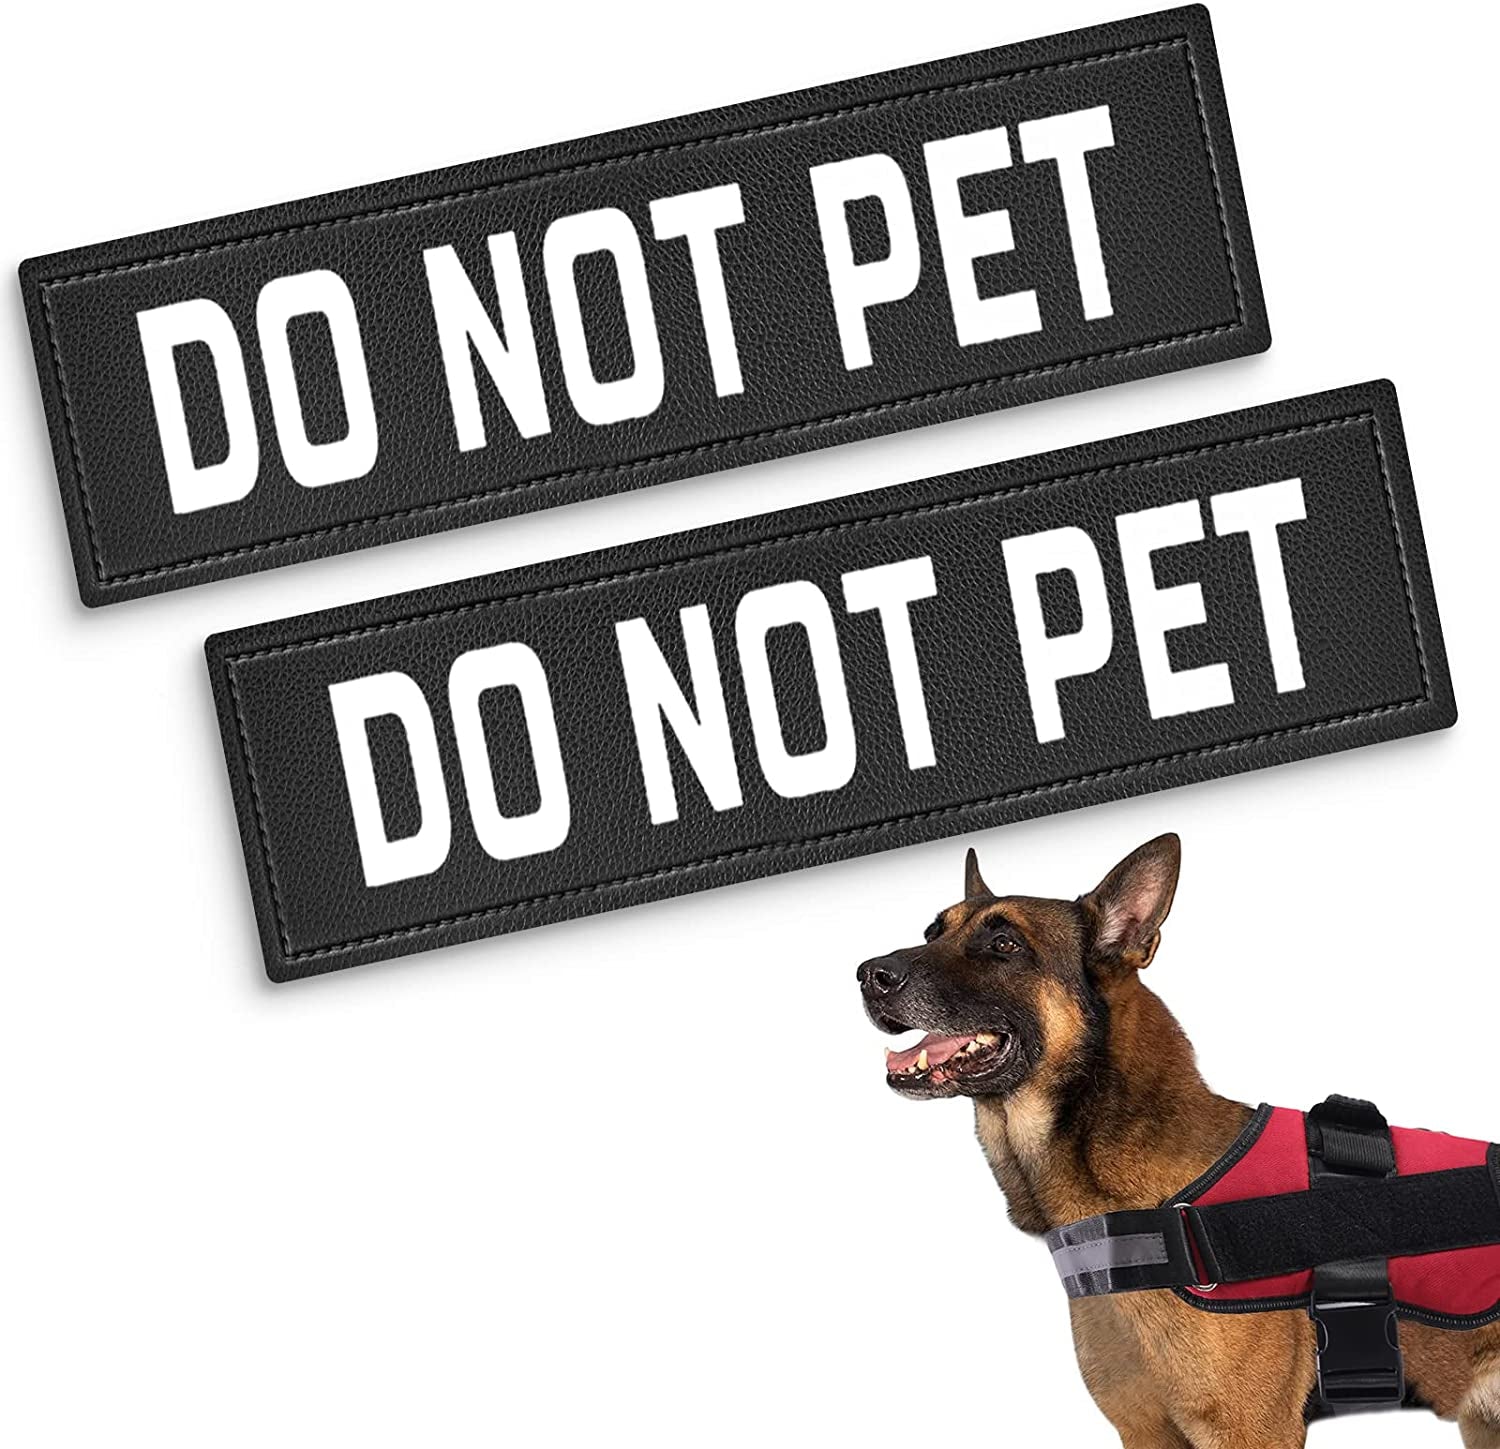 Dog Vest Patches 2 Free Removable Dog Tags for Dog Harness, Collar & Leash